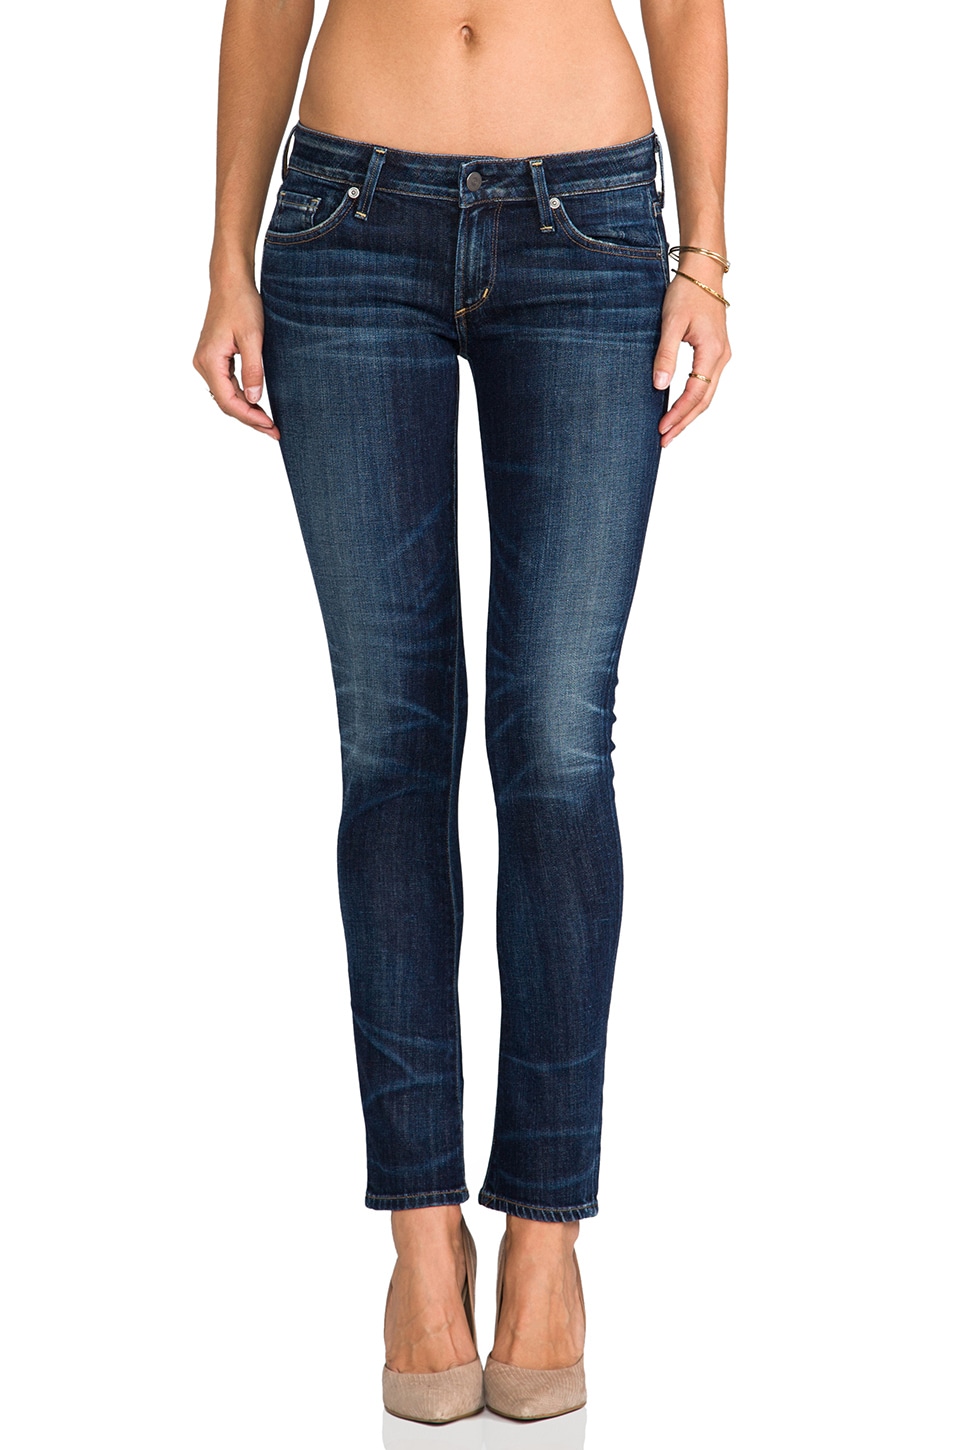 citizens of humanity racer slim jeans